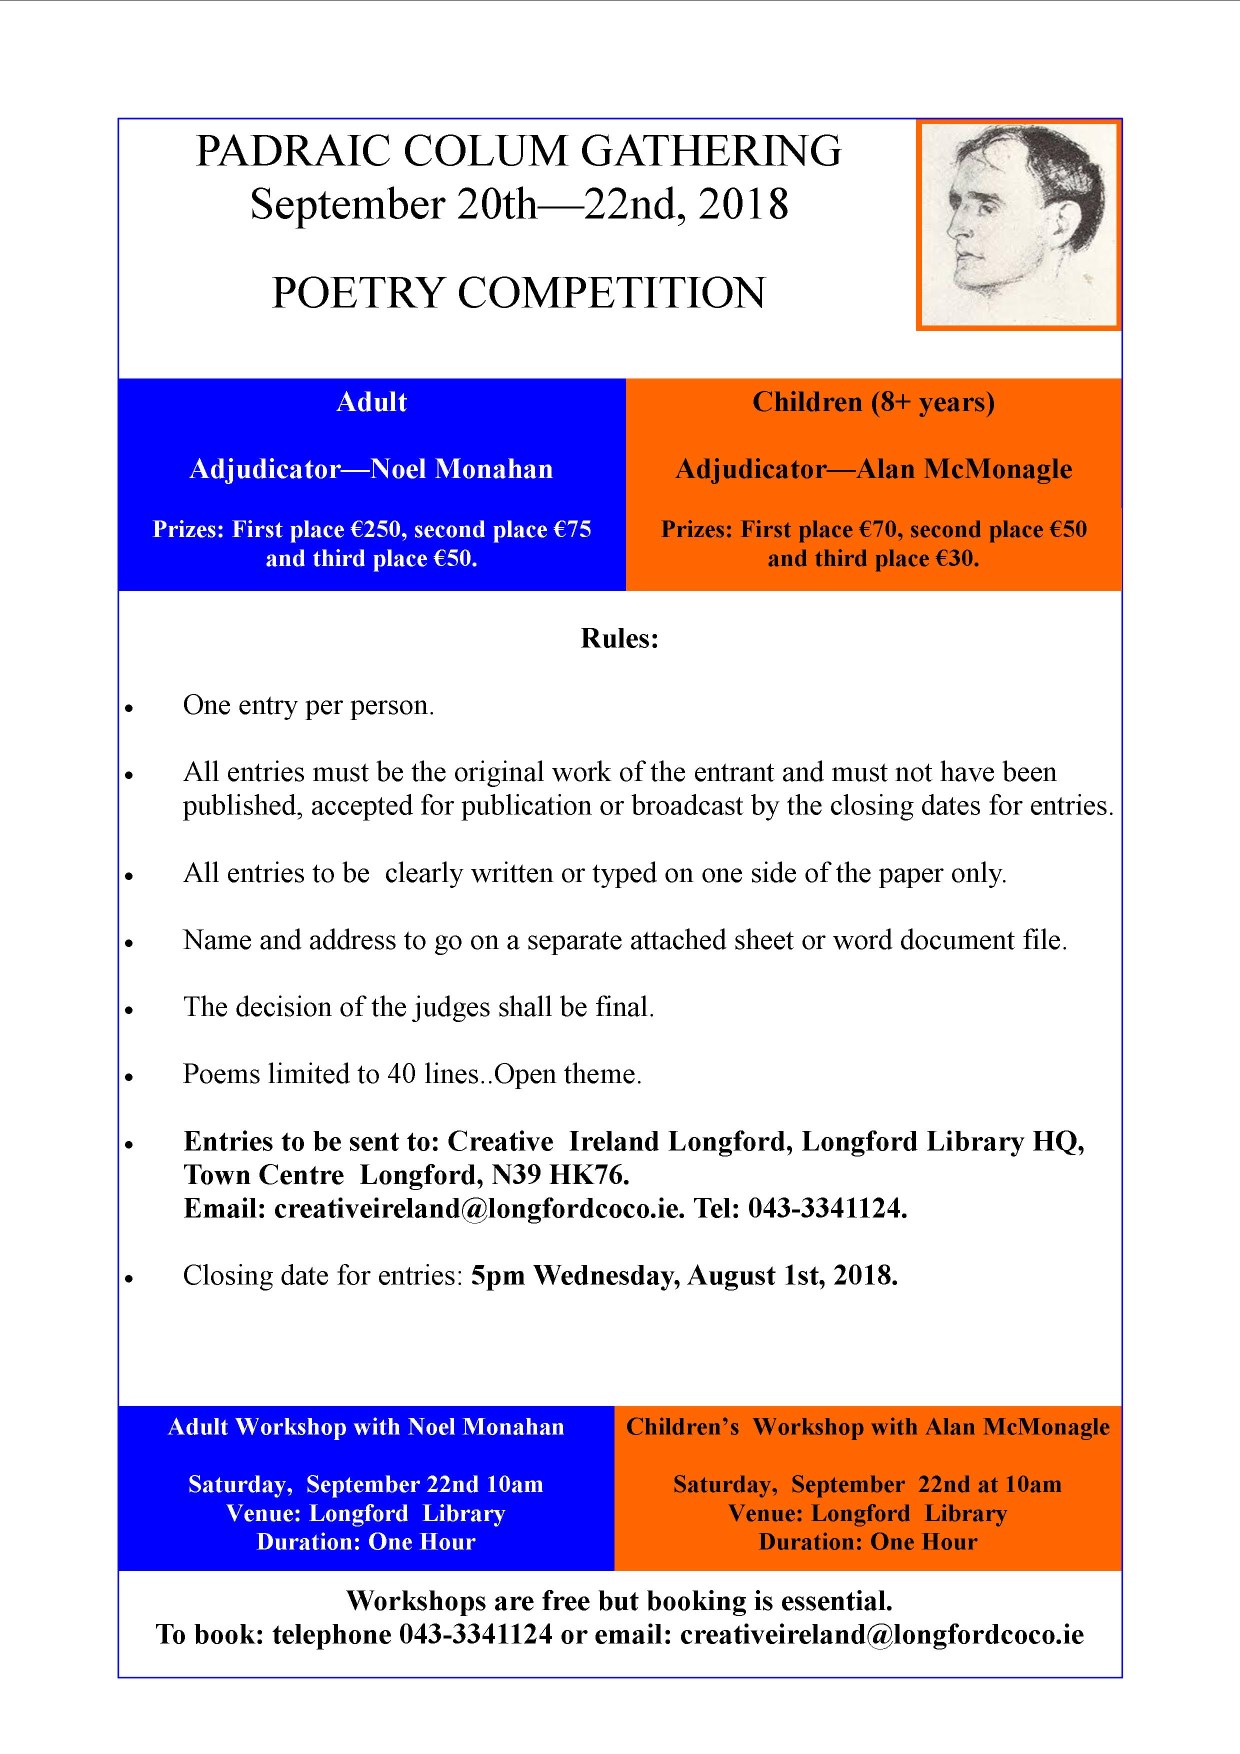 Padraig Colum Gathering 2018 Poetry Competition